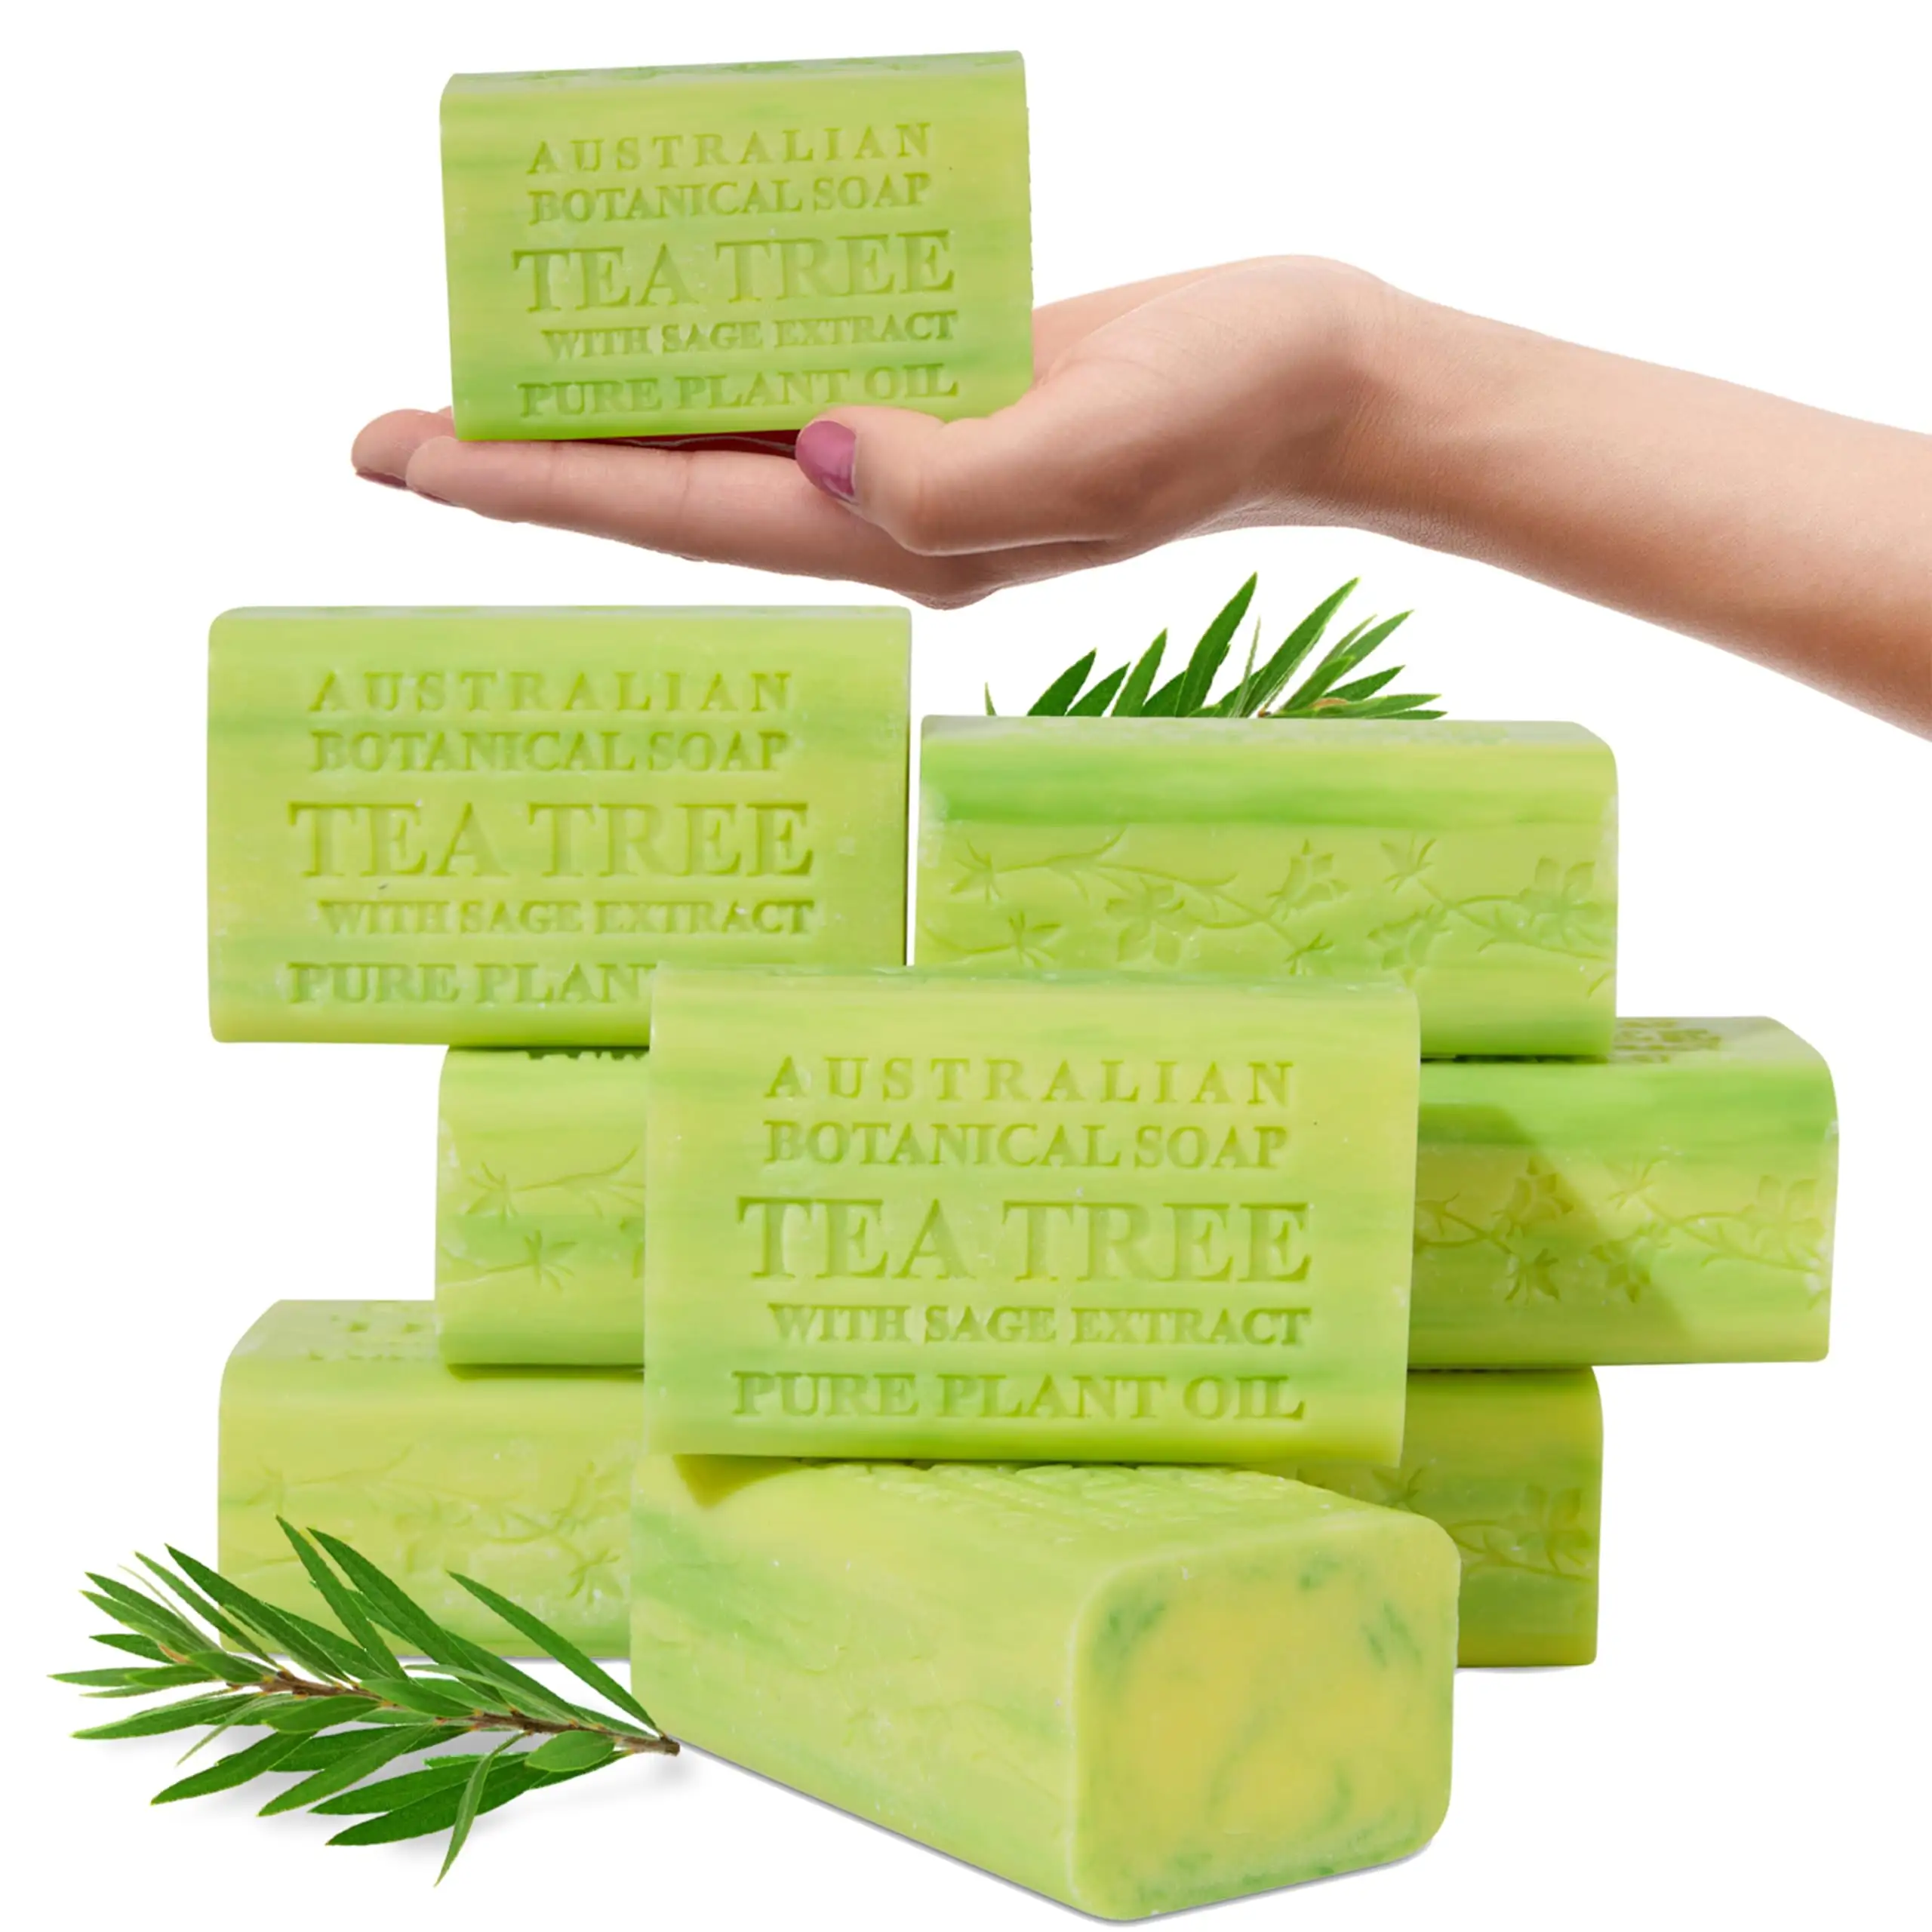 6.6 oz Australian Shea Butter Enriched Natural Tea Tree Oil Ingredient Tea Tree with Sage Extract soap Pack of 8